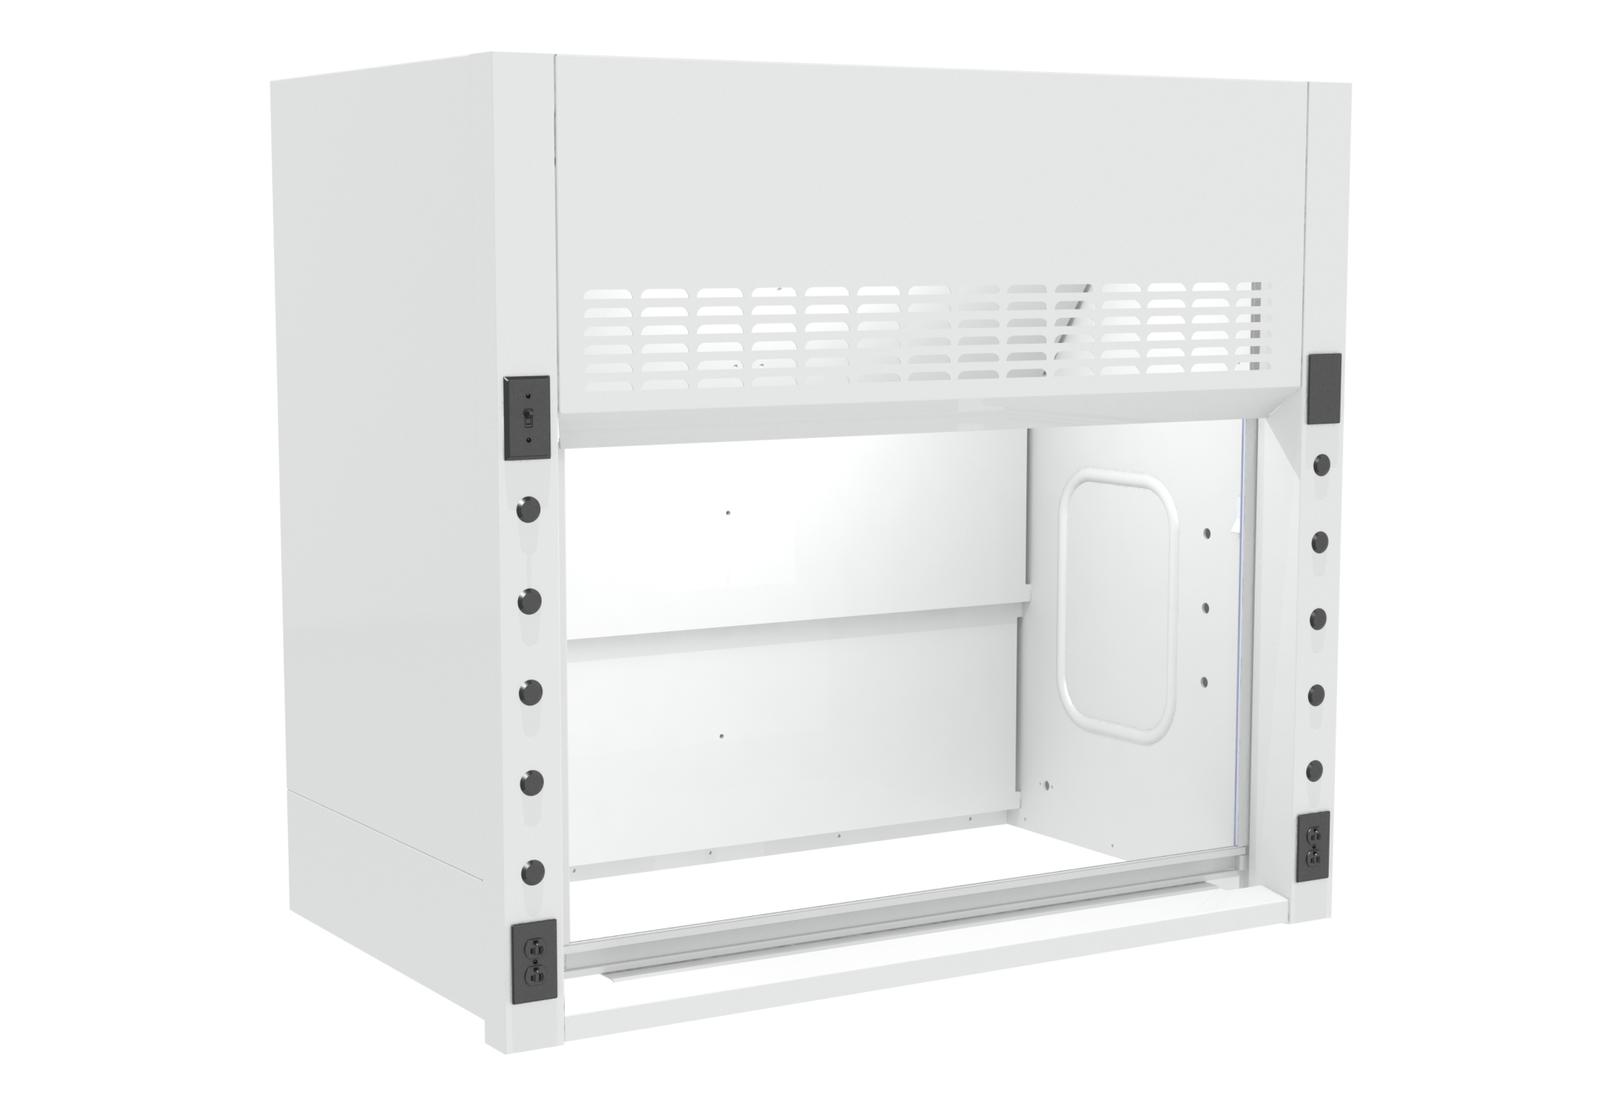 RFV2 Series Fume Hoods - New England Lab in Partnership with Mott Manufacturing